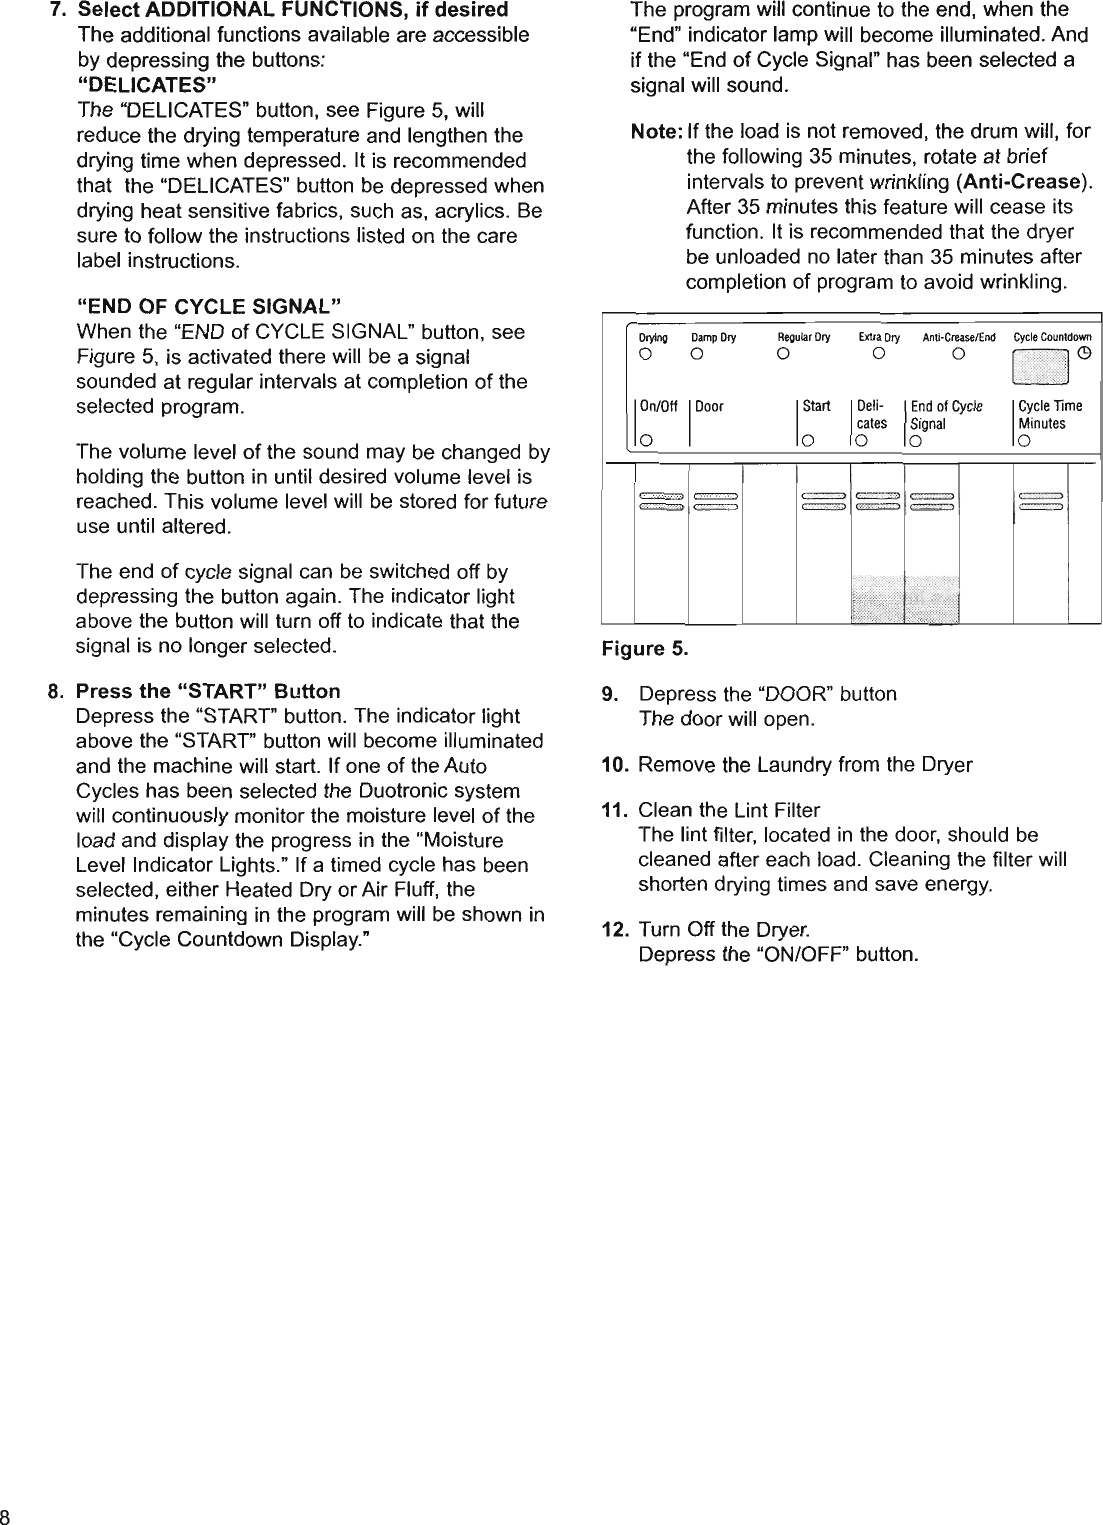 Page 8 of 12 - Boschhome Boschhome-Bosch-Appliances-Clothes-Dryer-Wta-3500-Users-Manual- Use & Care Manual For Bosch WTA 3500 And WTL 5400 Dryers  Boschhome-bosch-appliances-clothes-dryer-wta-3500-users-manual